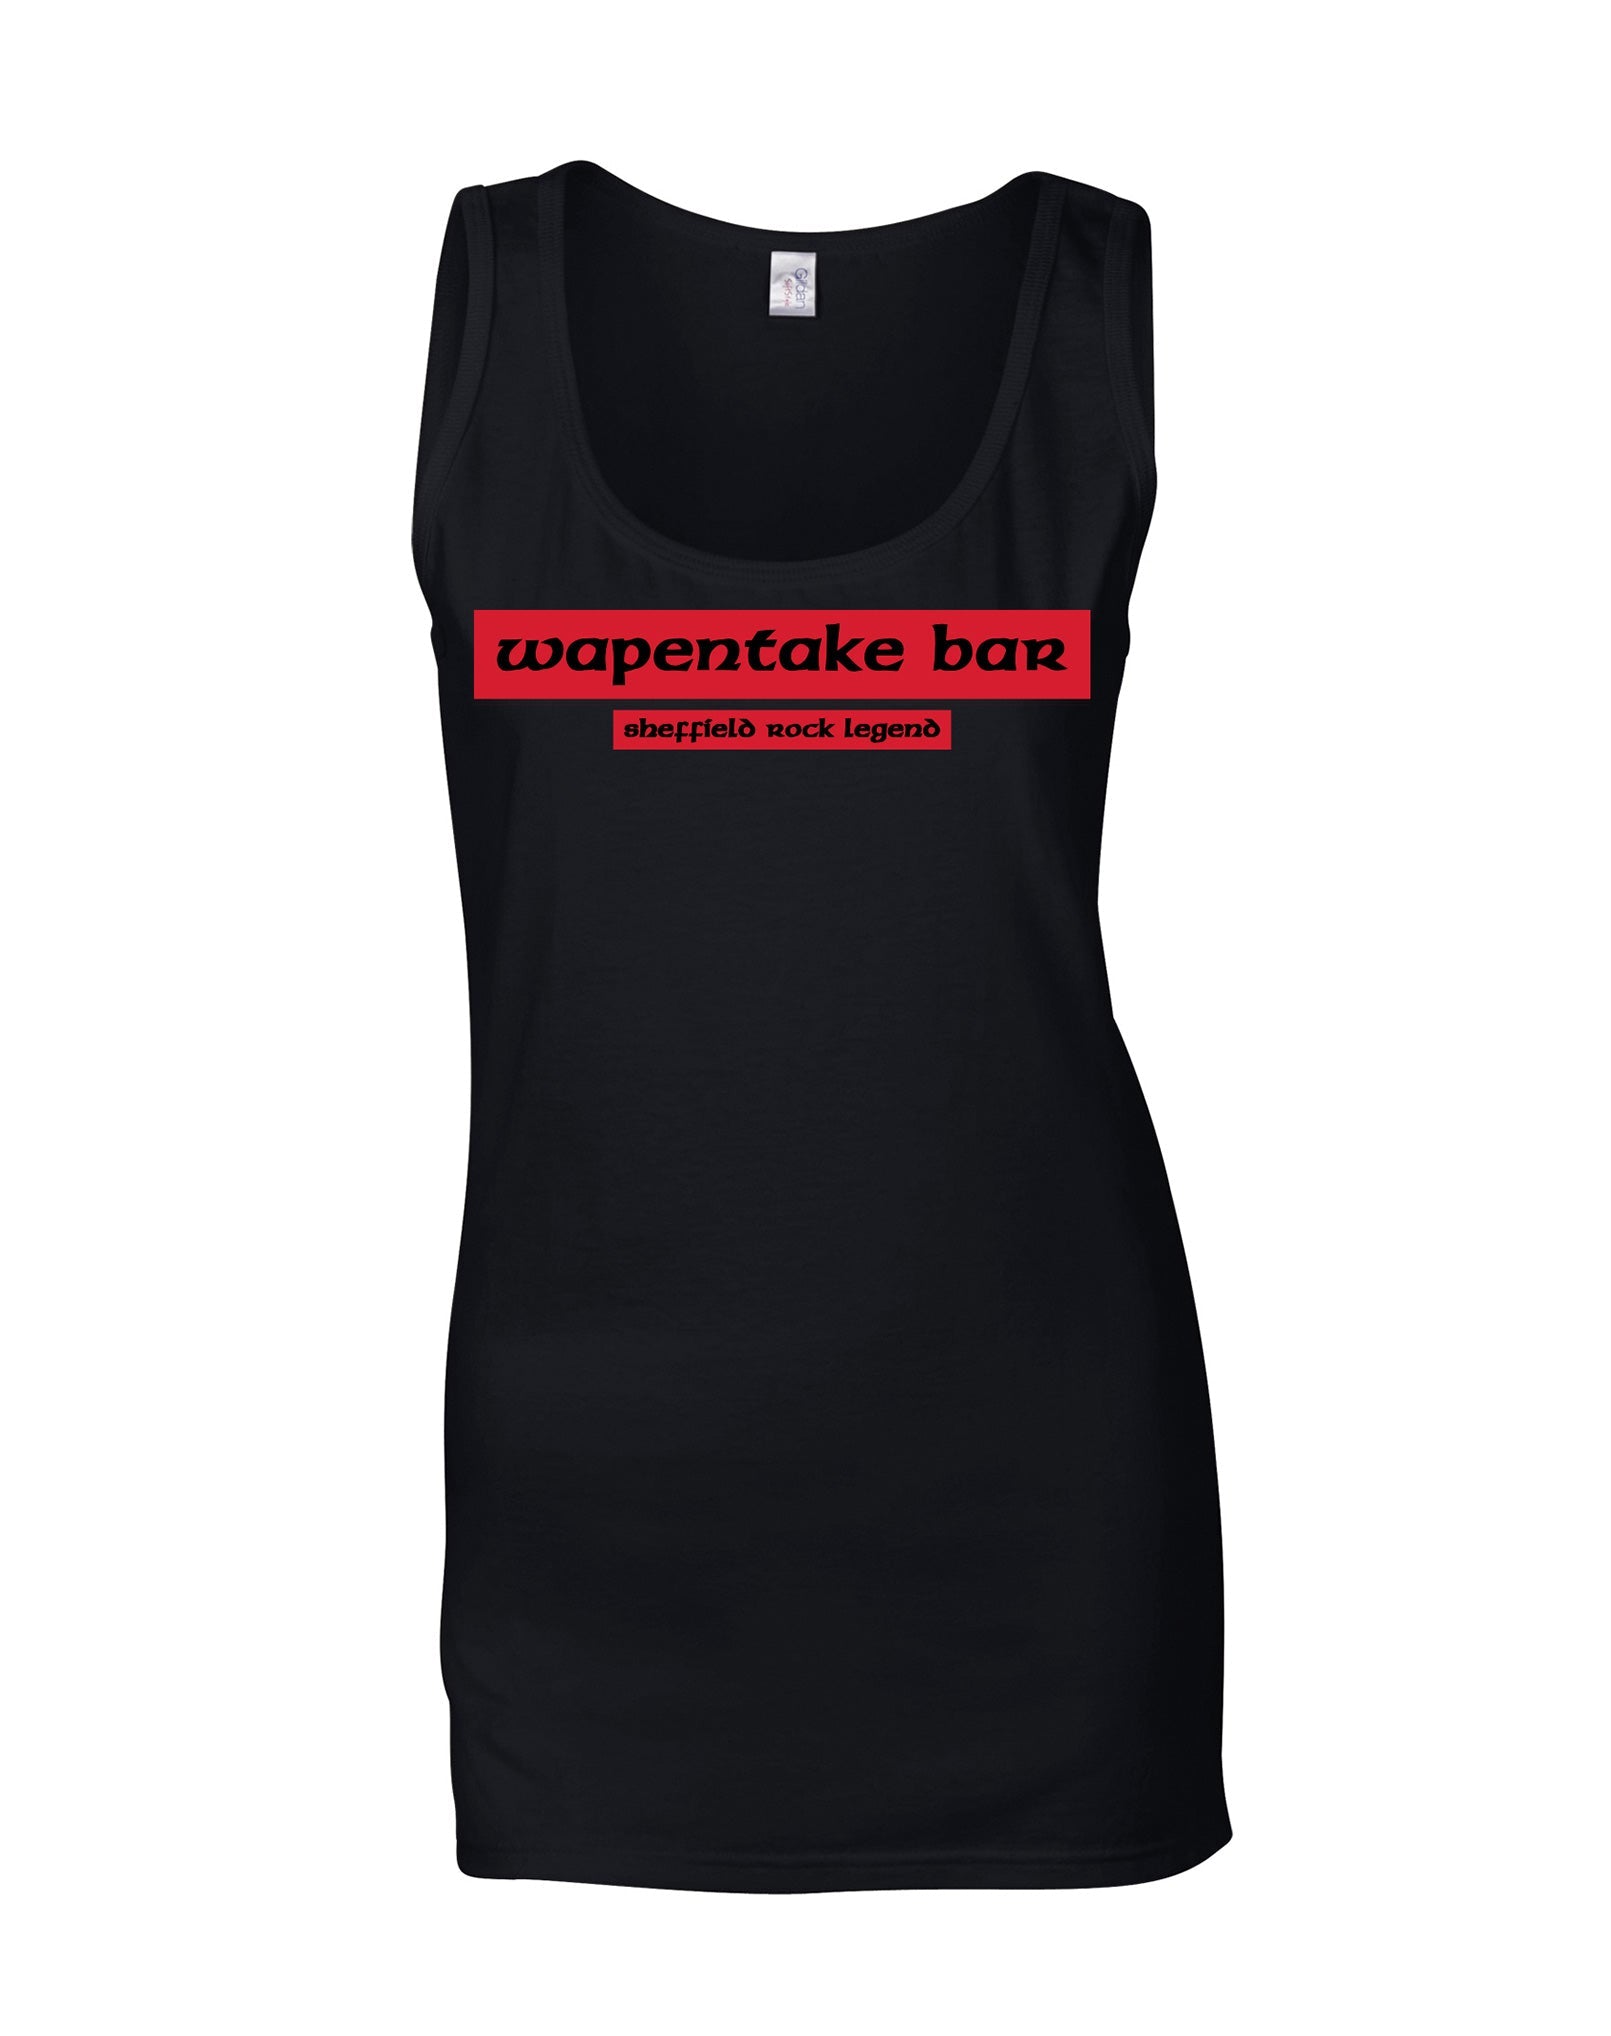 Wapentake Bar ladies fit vest - various colours - Dirty Stop Outs